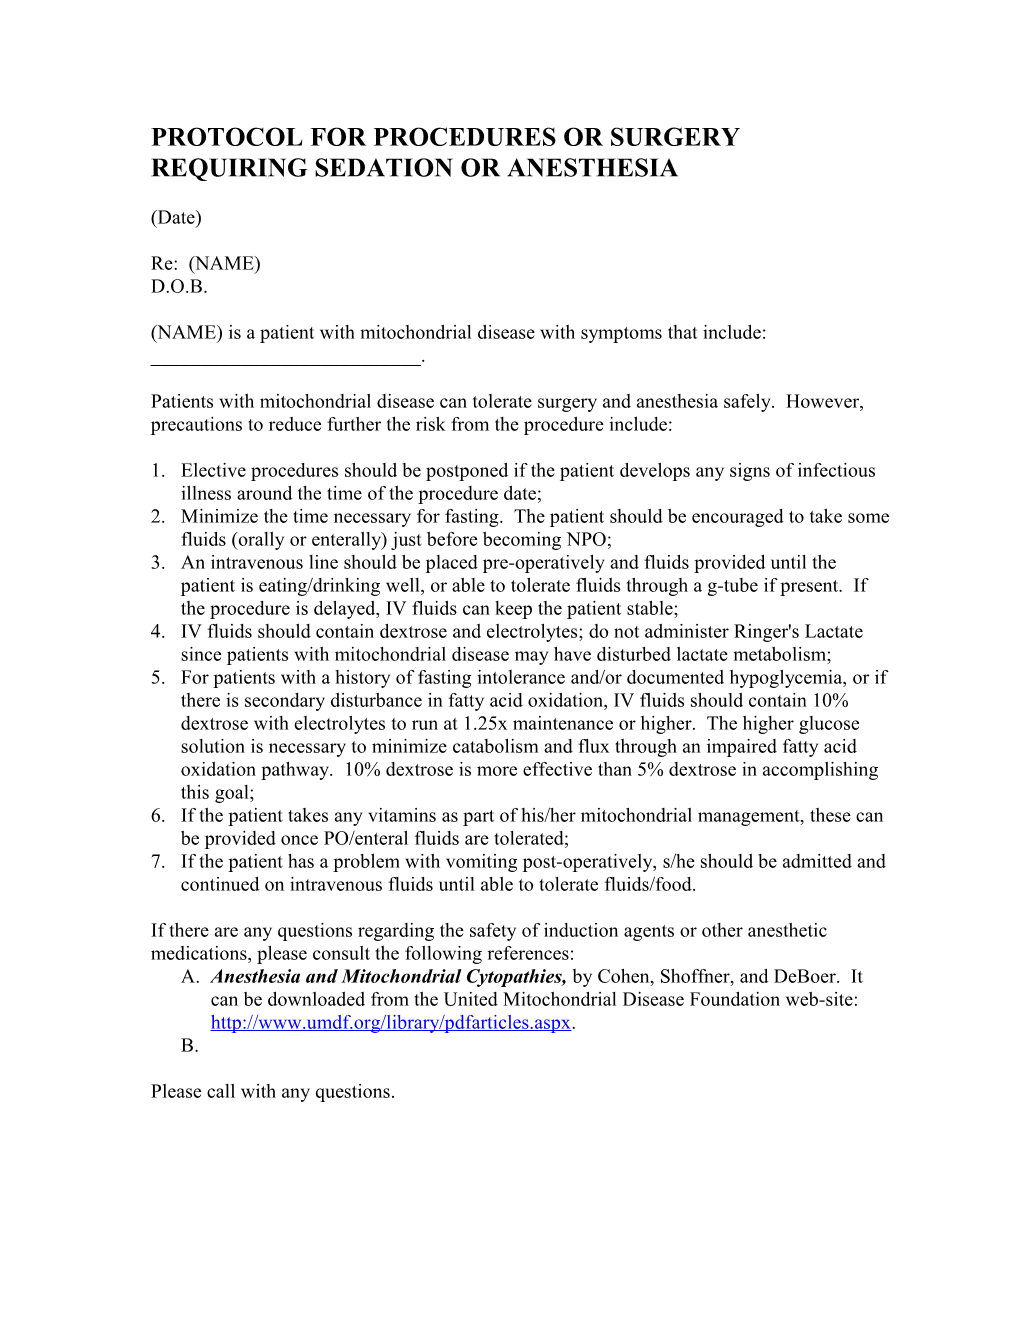 Protocol for Procedures Or Surgery Requiring Sedation Or Anesthesia